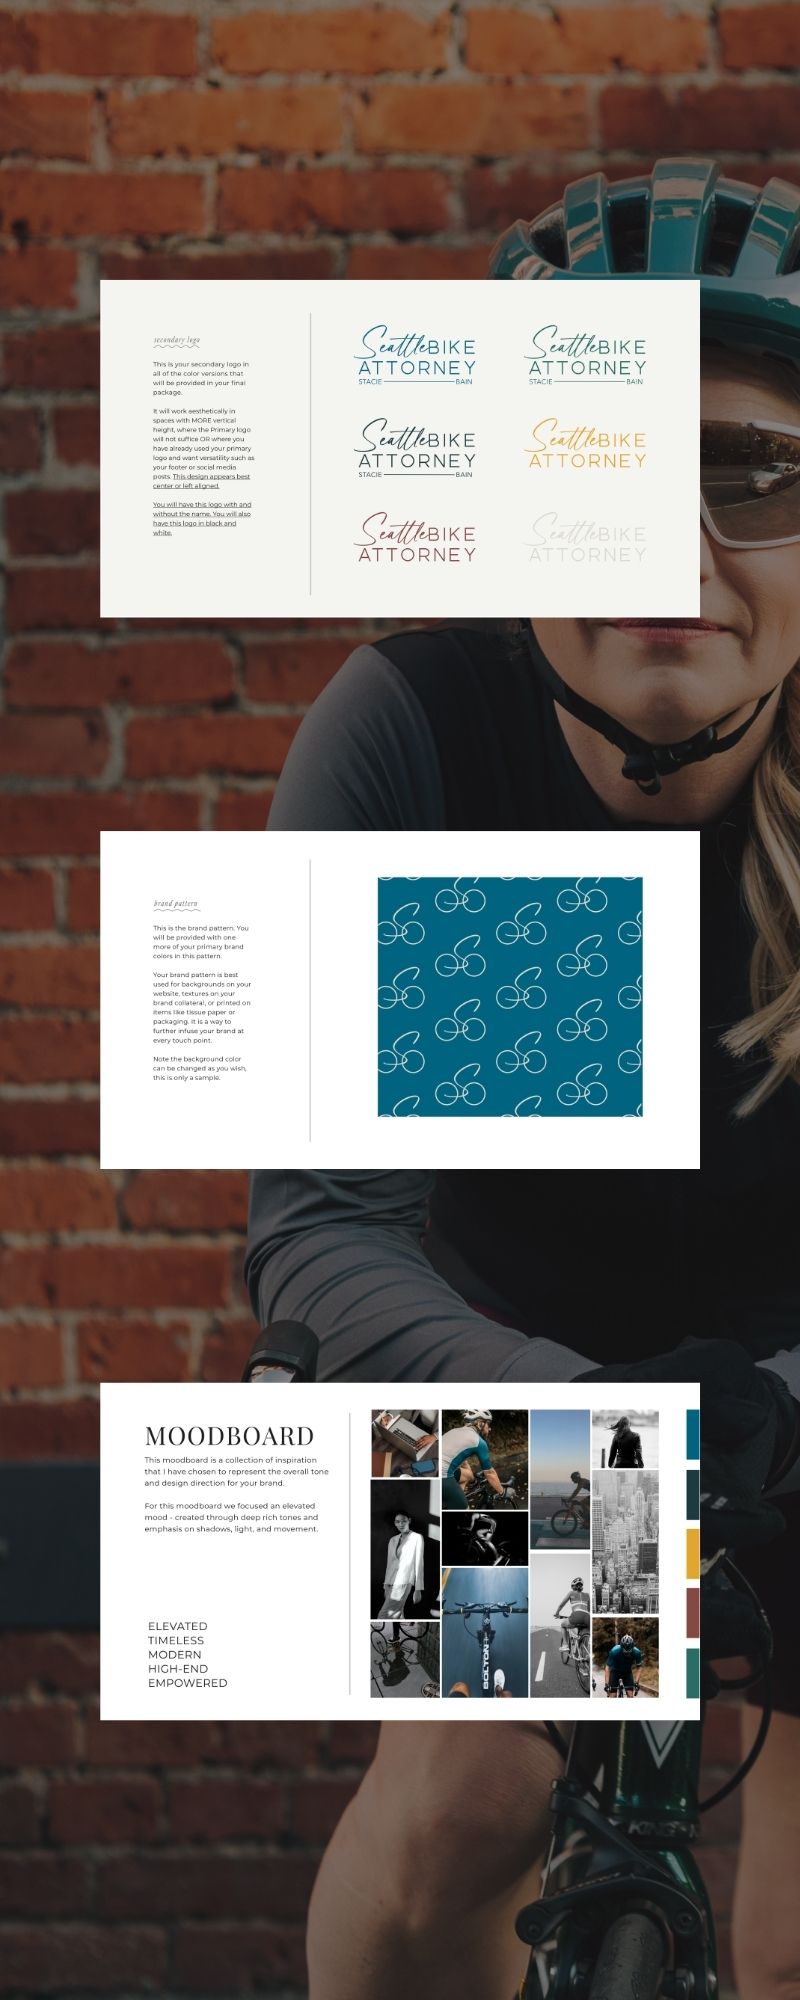 Brand board for Seattle Bike Attorney showing variations of the logo in different colors, a branded pattern with bicycle icons on a teal background, and a mood board with dynamic cycling images to represent the brand’s essence.